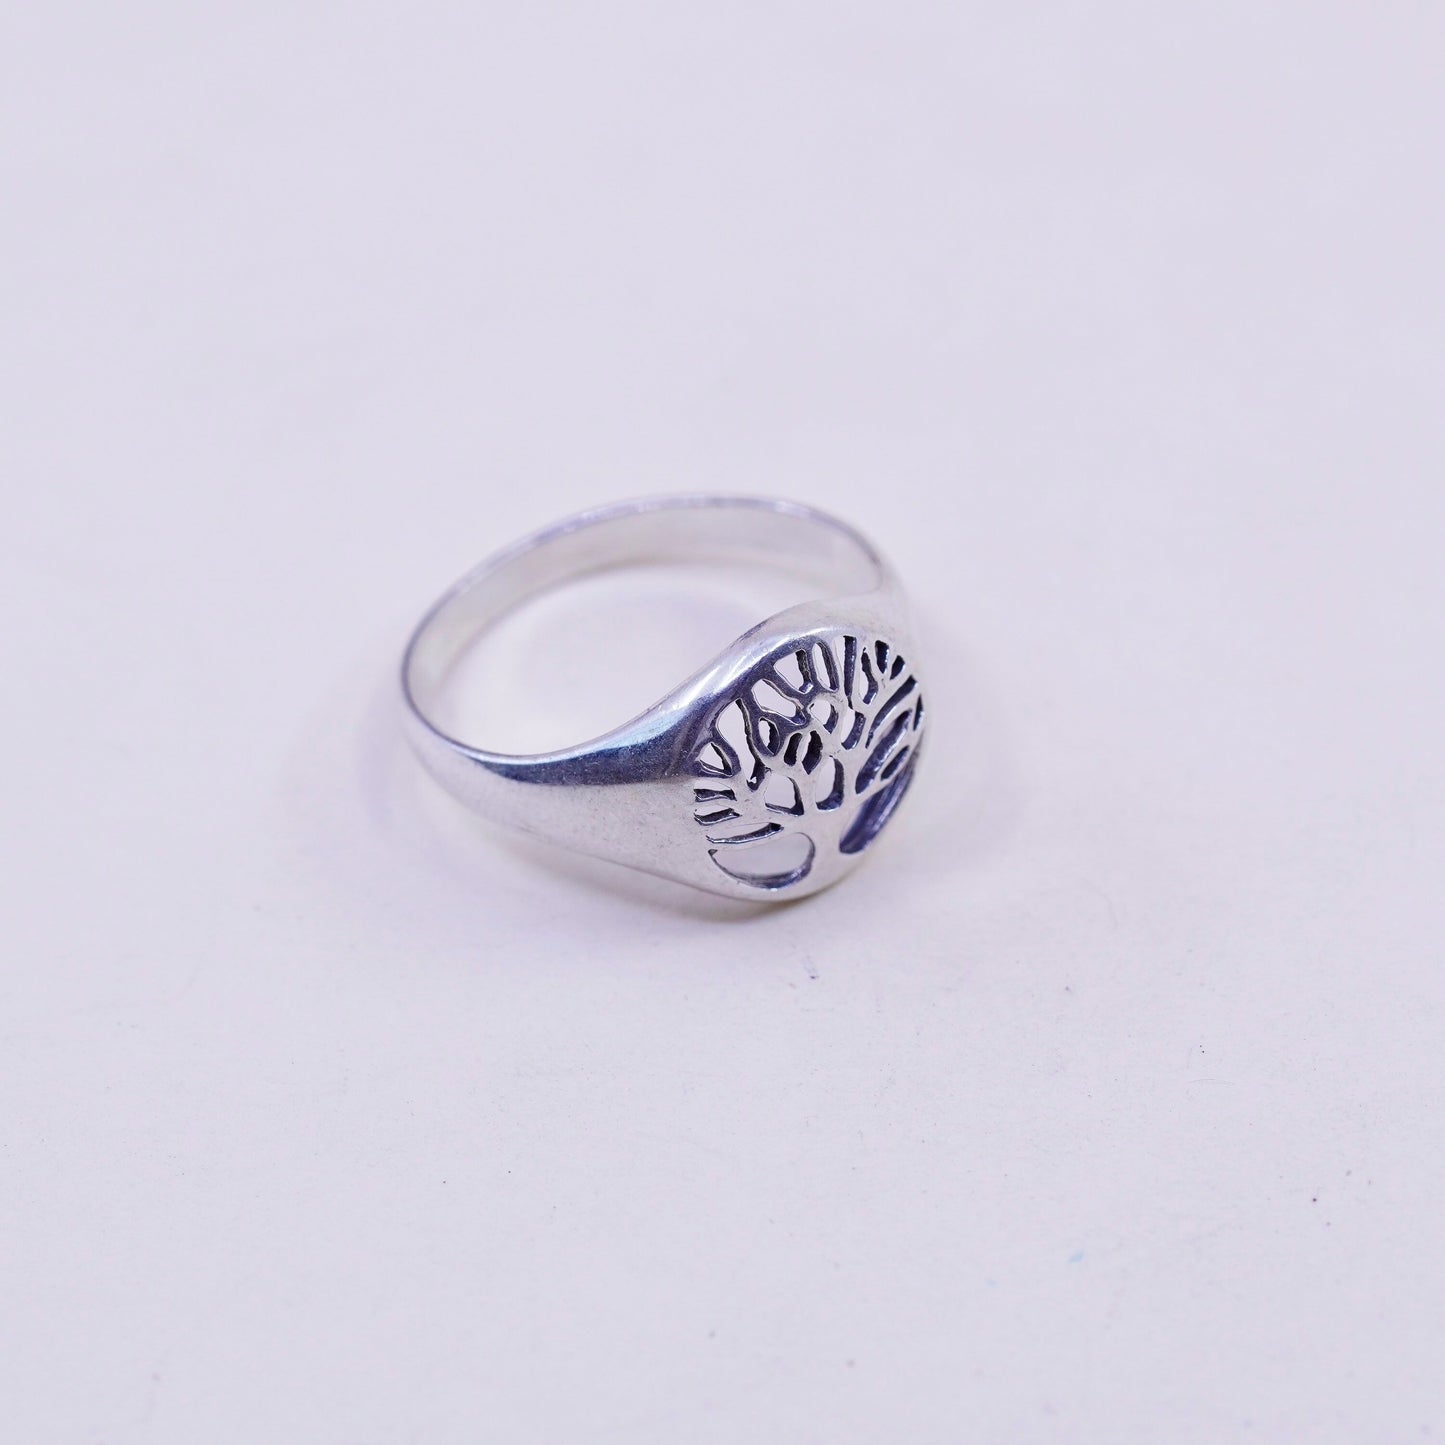 Size 9, vintage sterling silver handmade ring, 925 filigree tree band